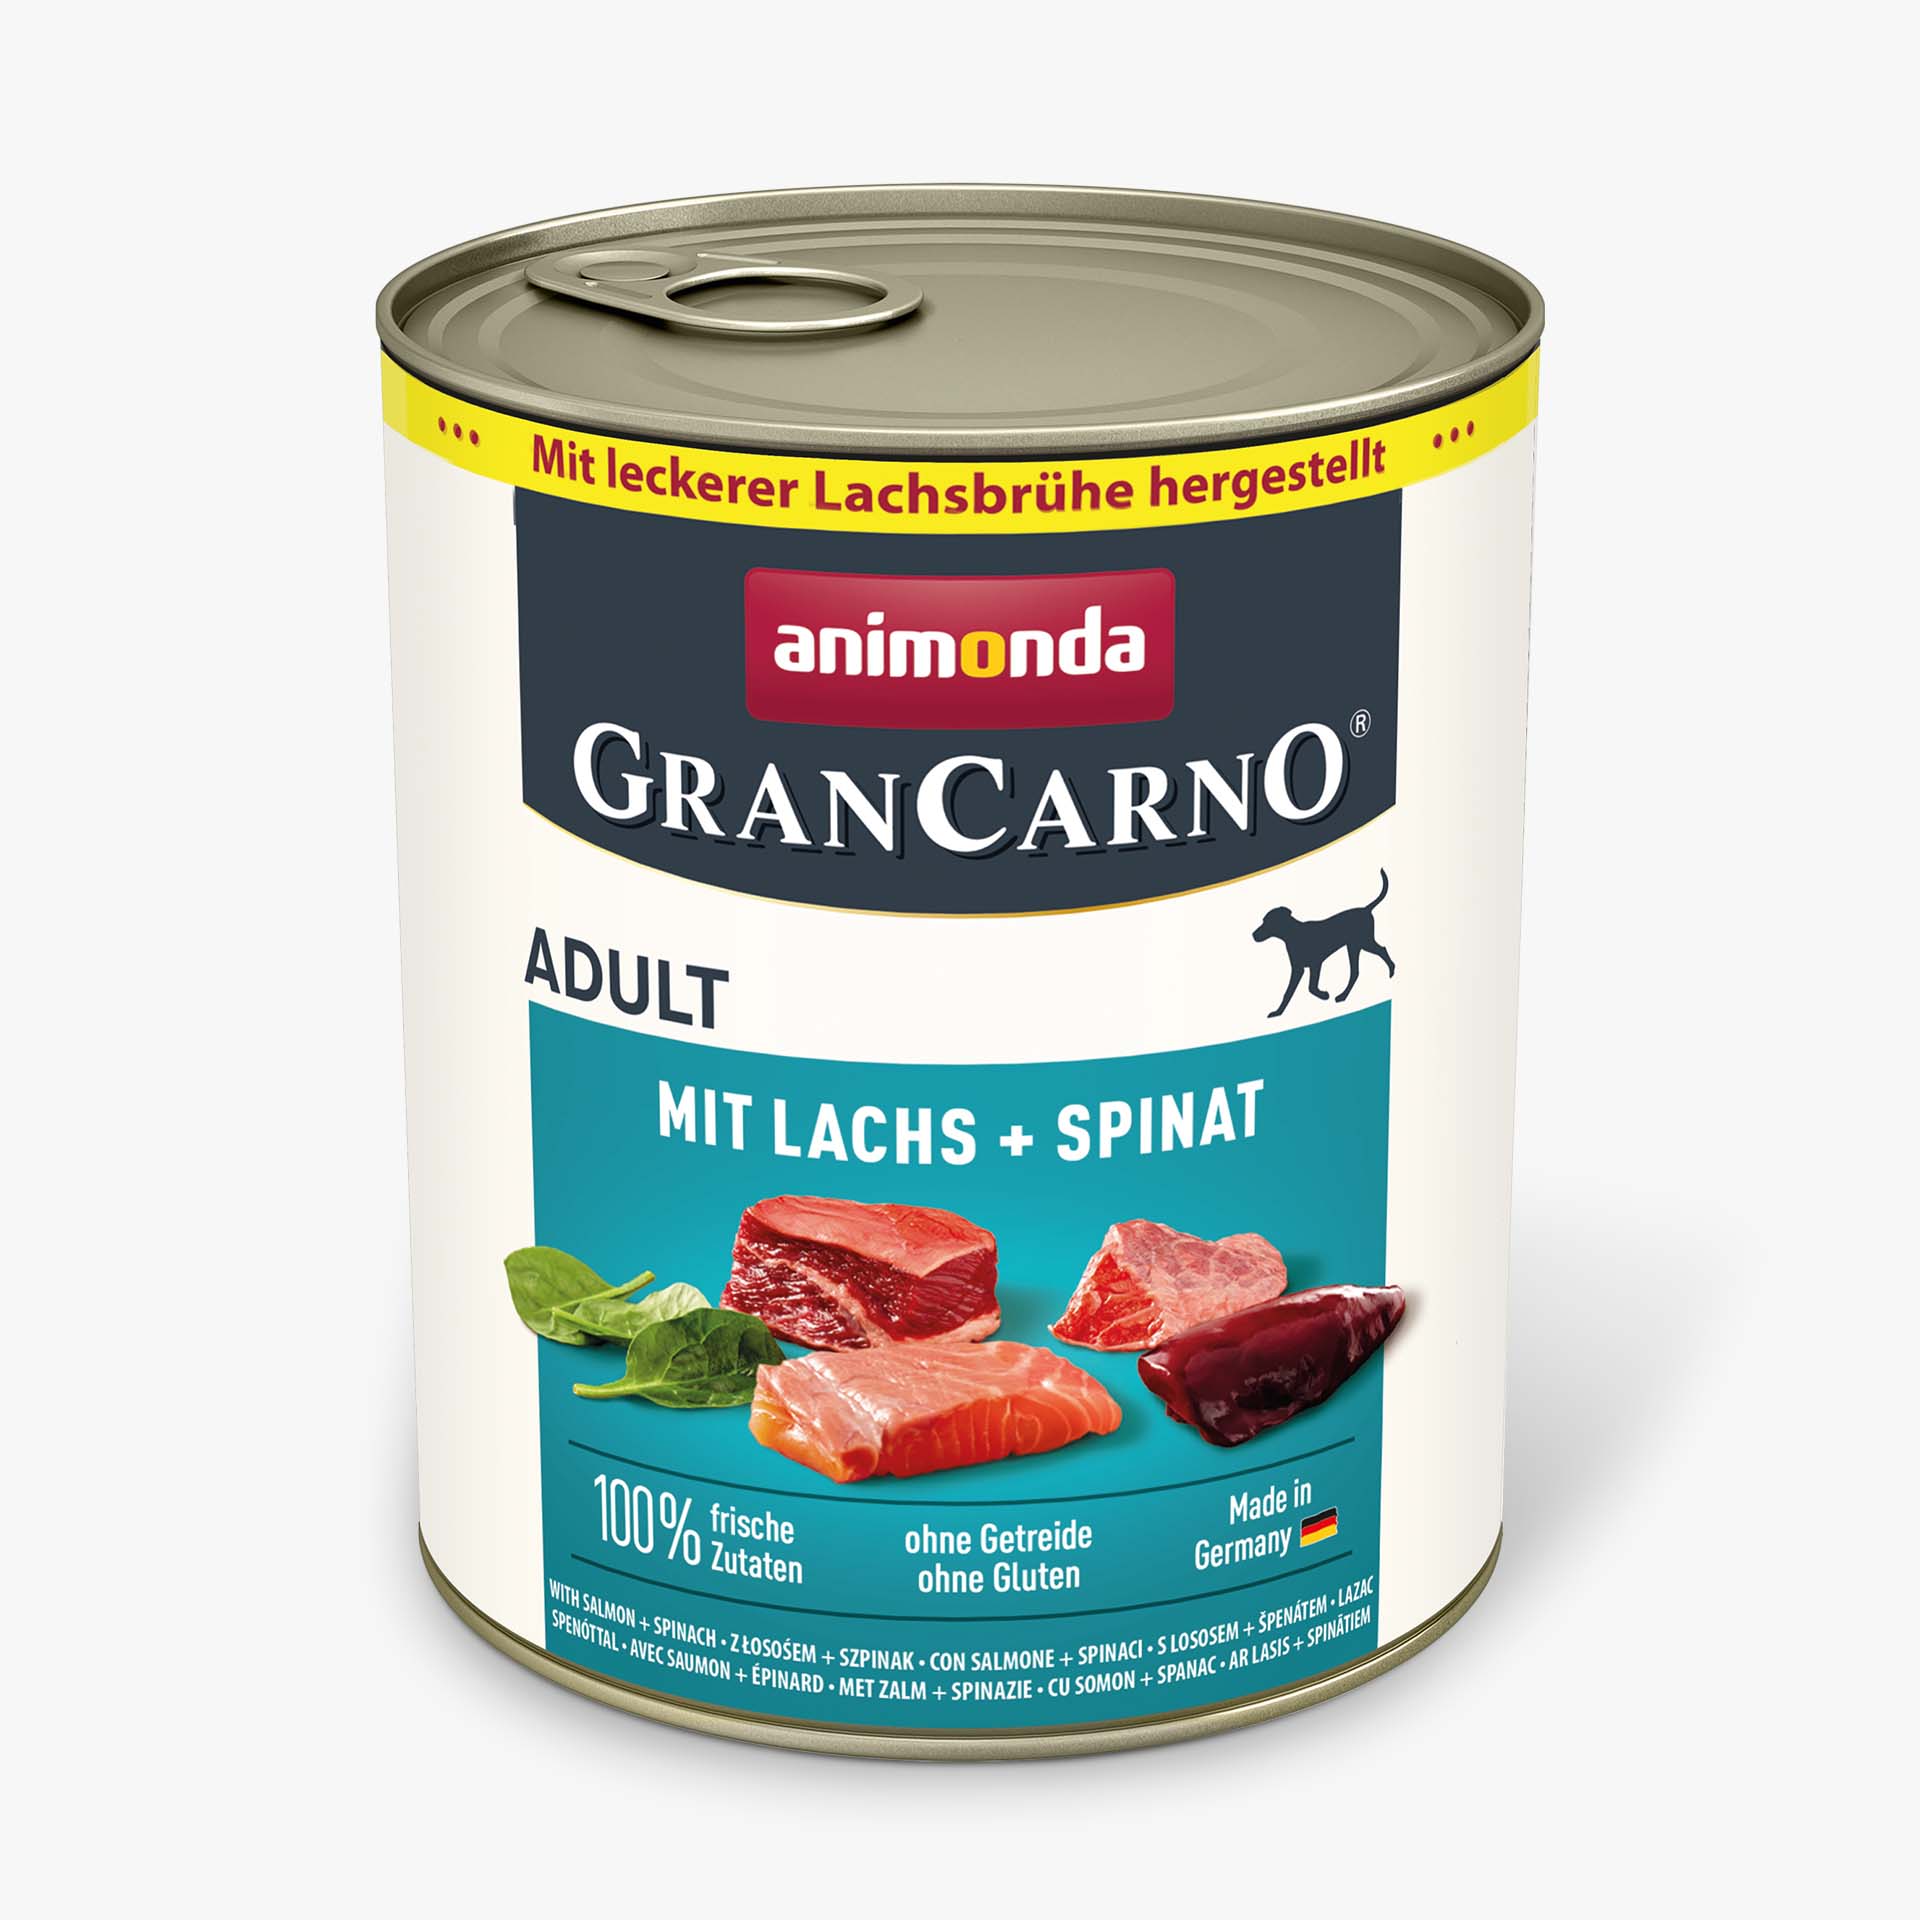 GranCarno Adult mit Lachs + Spinat